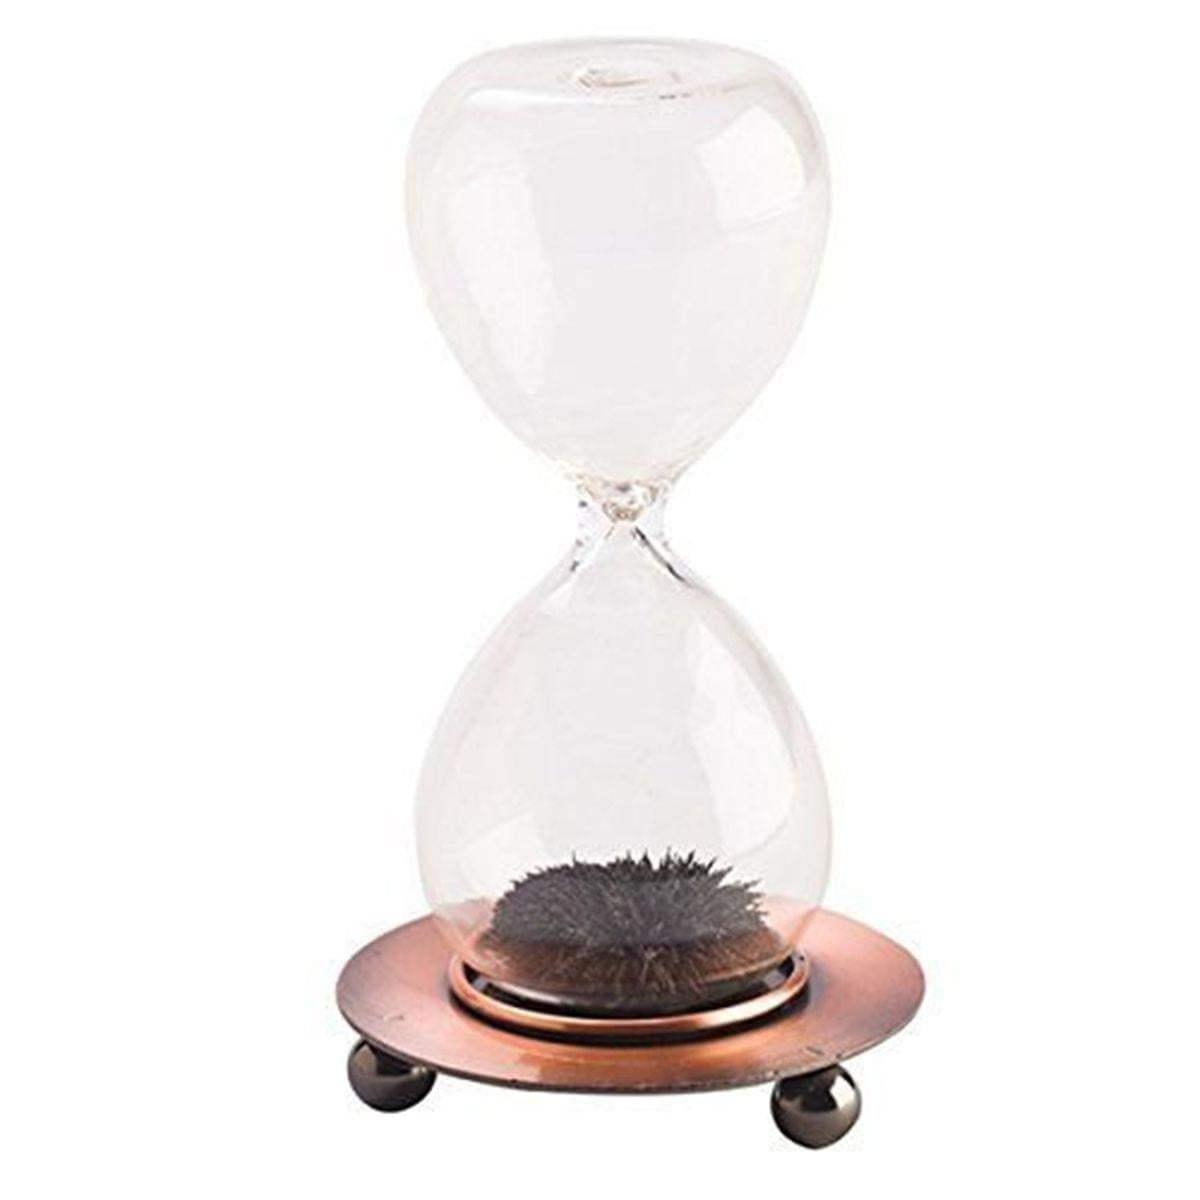 Ideas In Life Hand-Blown Glass Sand Timer Magnet Magnetic Office Toy with Wooden Base Create 3-D Art 